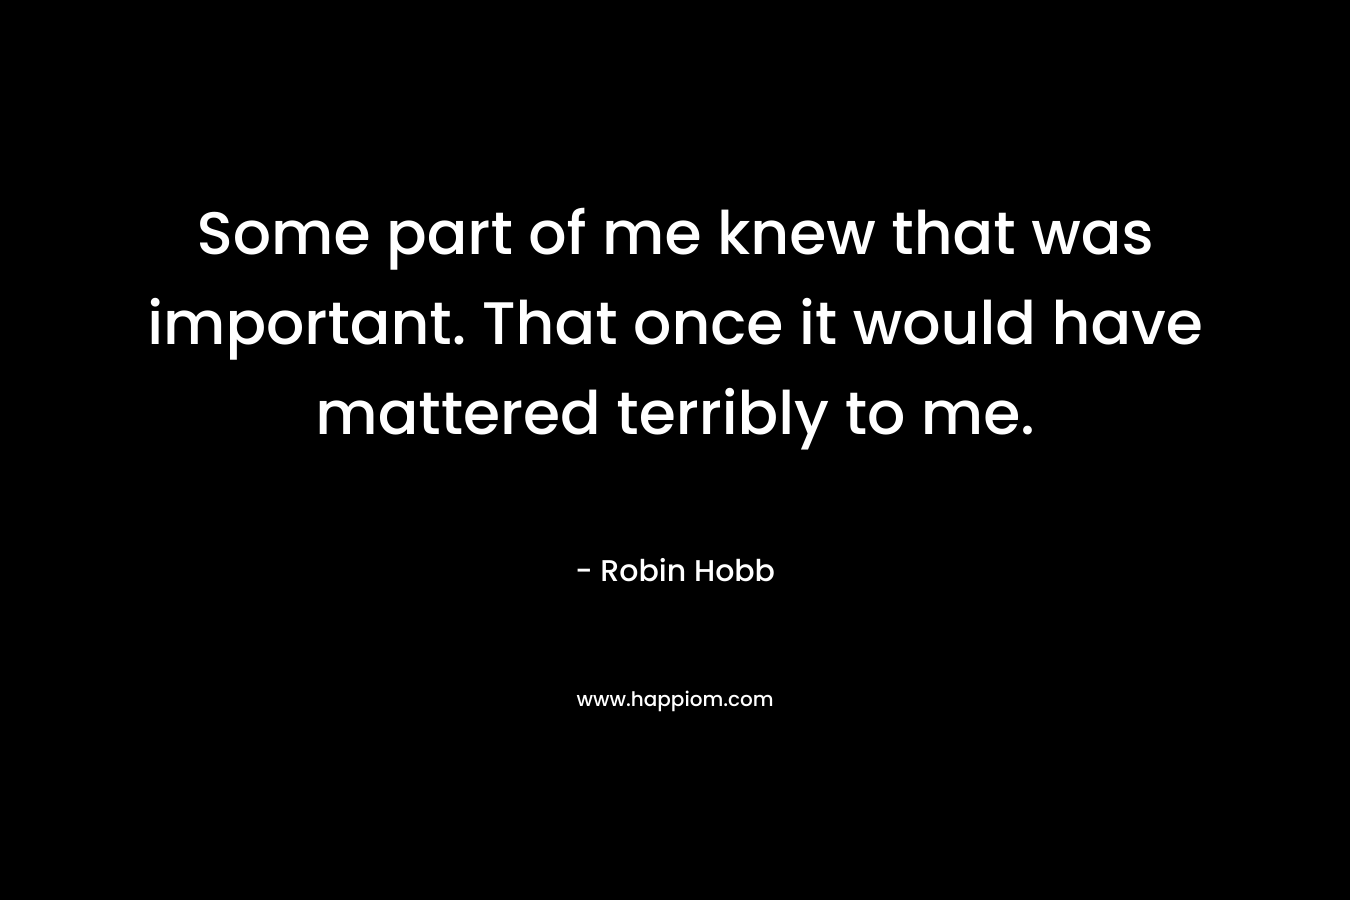 Some part of me knew that was important. That once it would have mattered terribly to me. – Robin Hobb